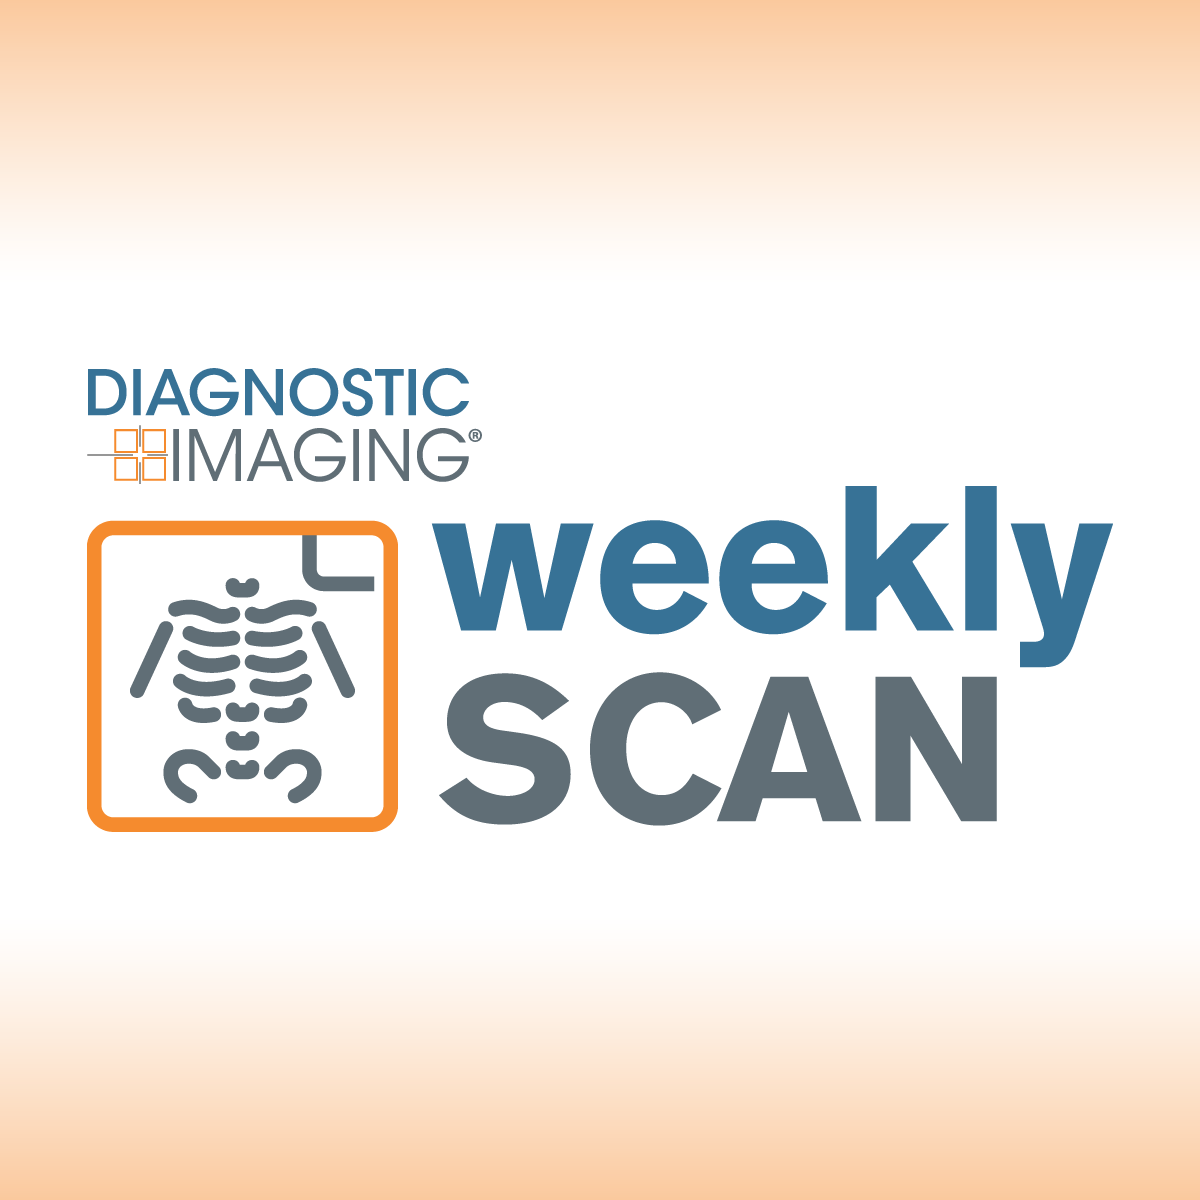 Diagnostic Imaging's Weekly Scan: January 7-January 13